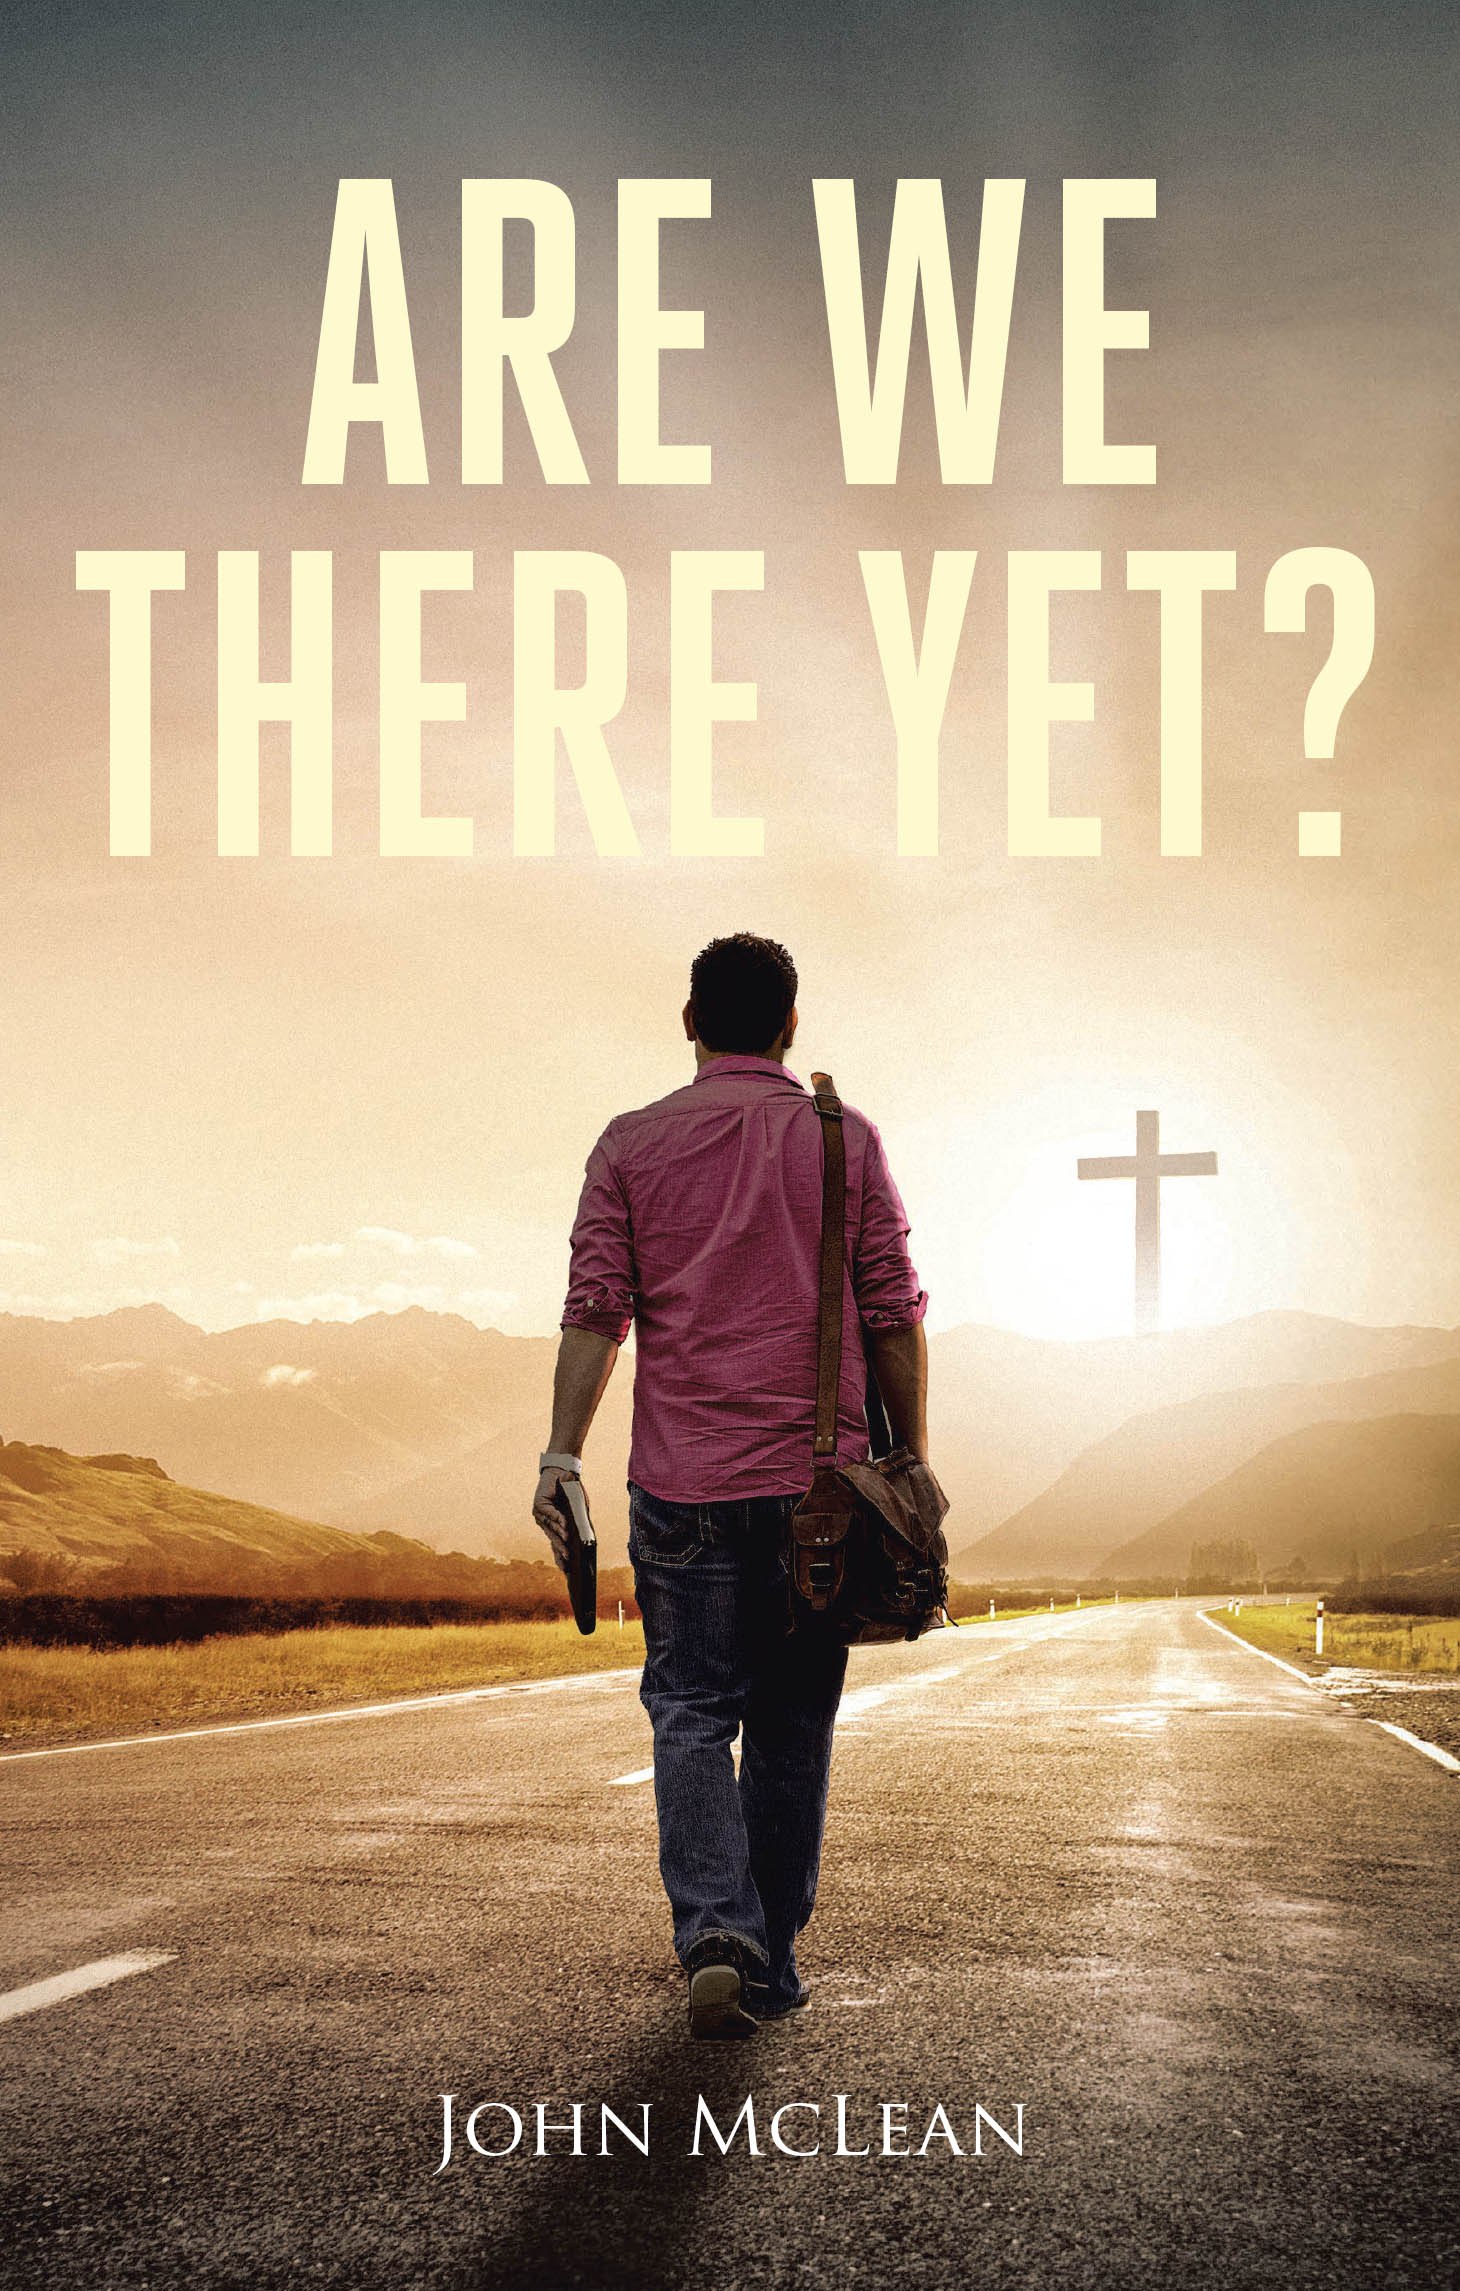 John McLean’s Newly Released "Are We There Yet?" is an Enlightening Exploration of Simplified Christianity